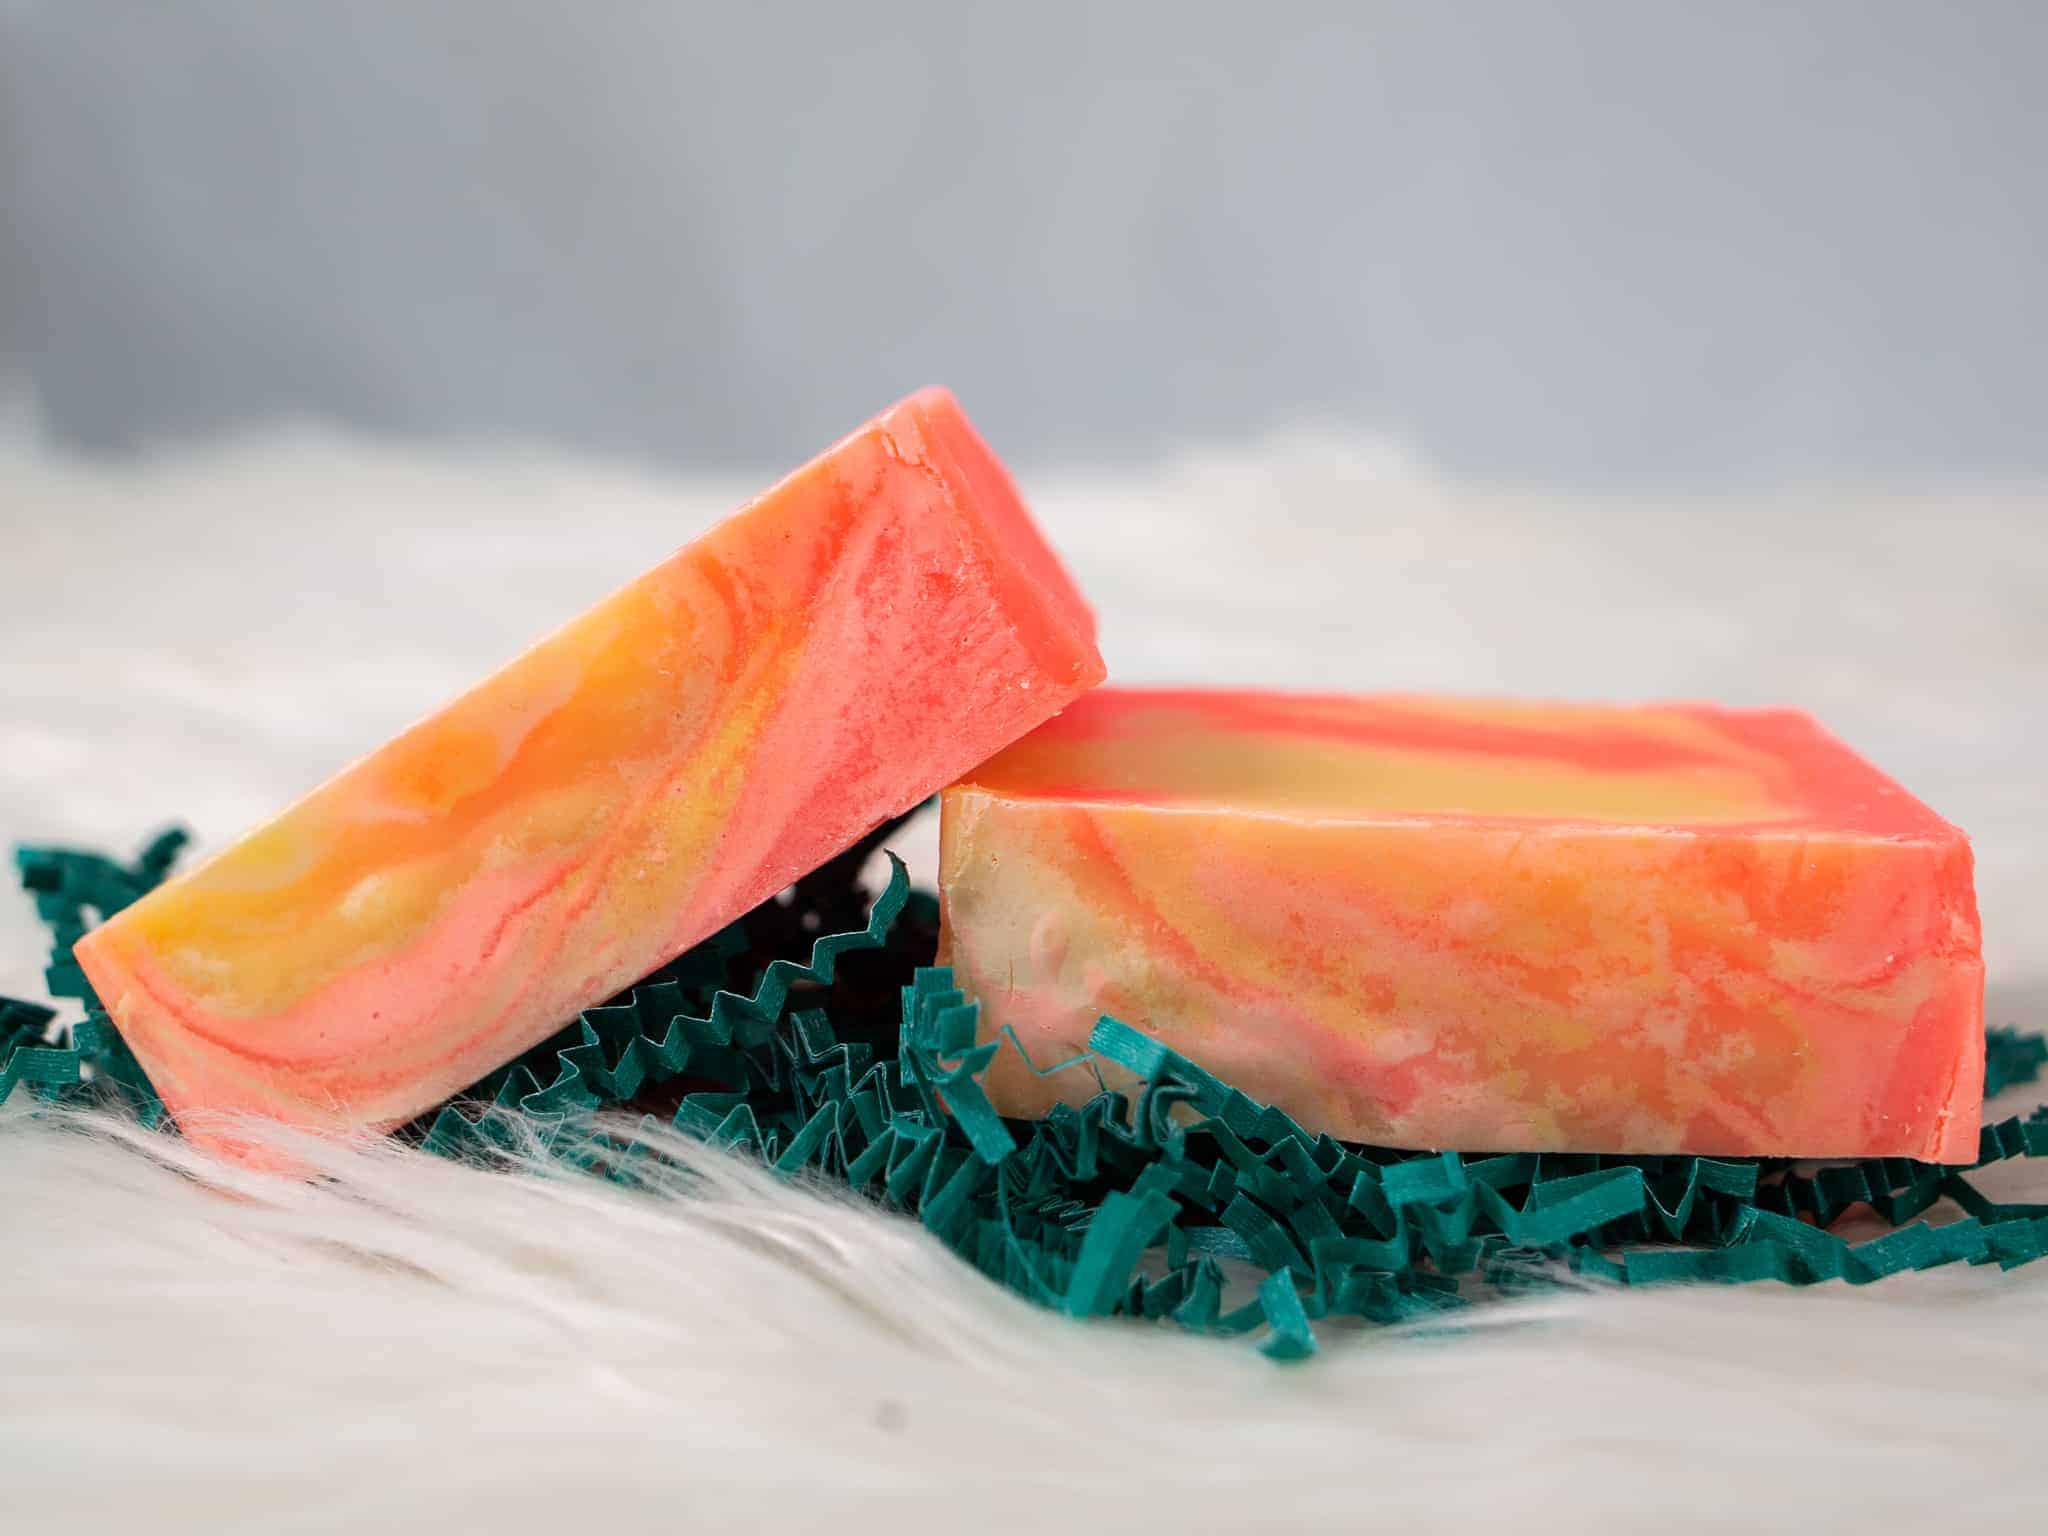 This Energy Vegan Soap is made with love by Sudzy Bums! Shop more unique gift ideas today with Spots Initiatives, the best way to support creators.